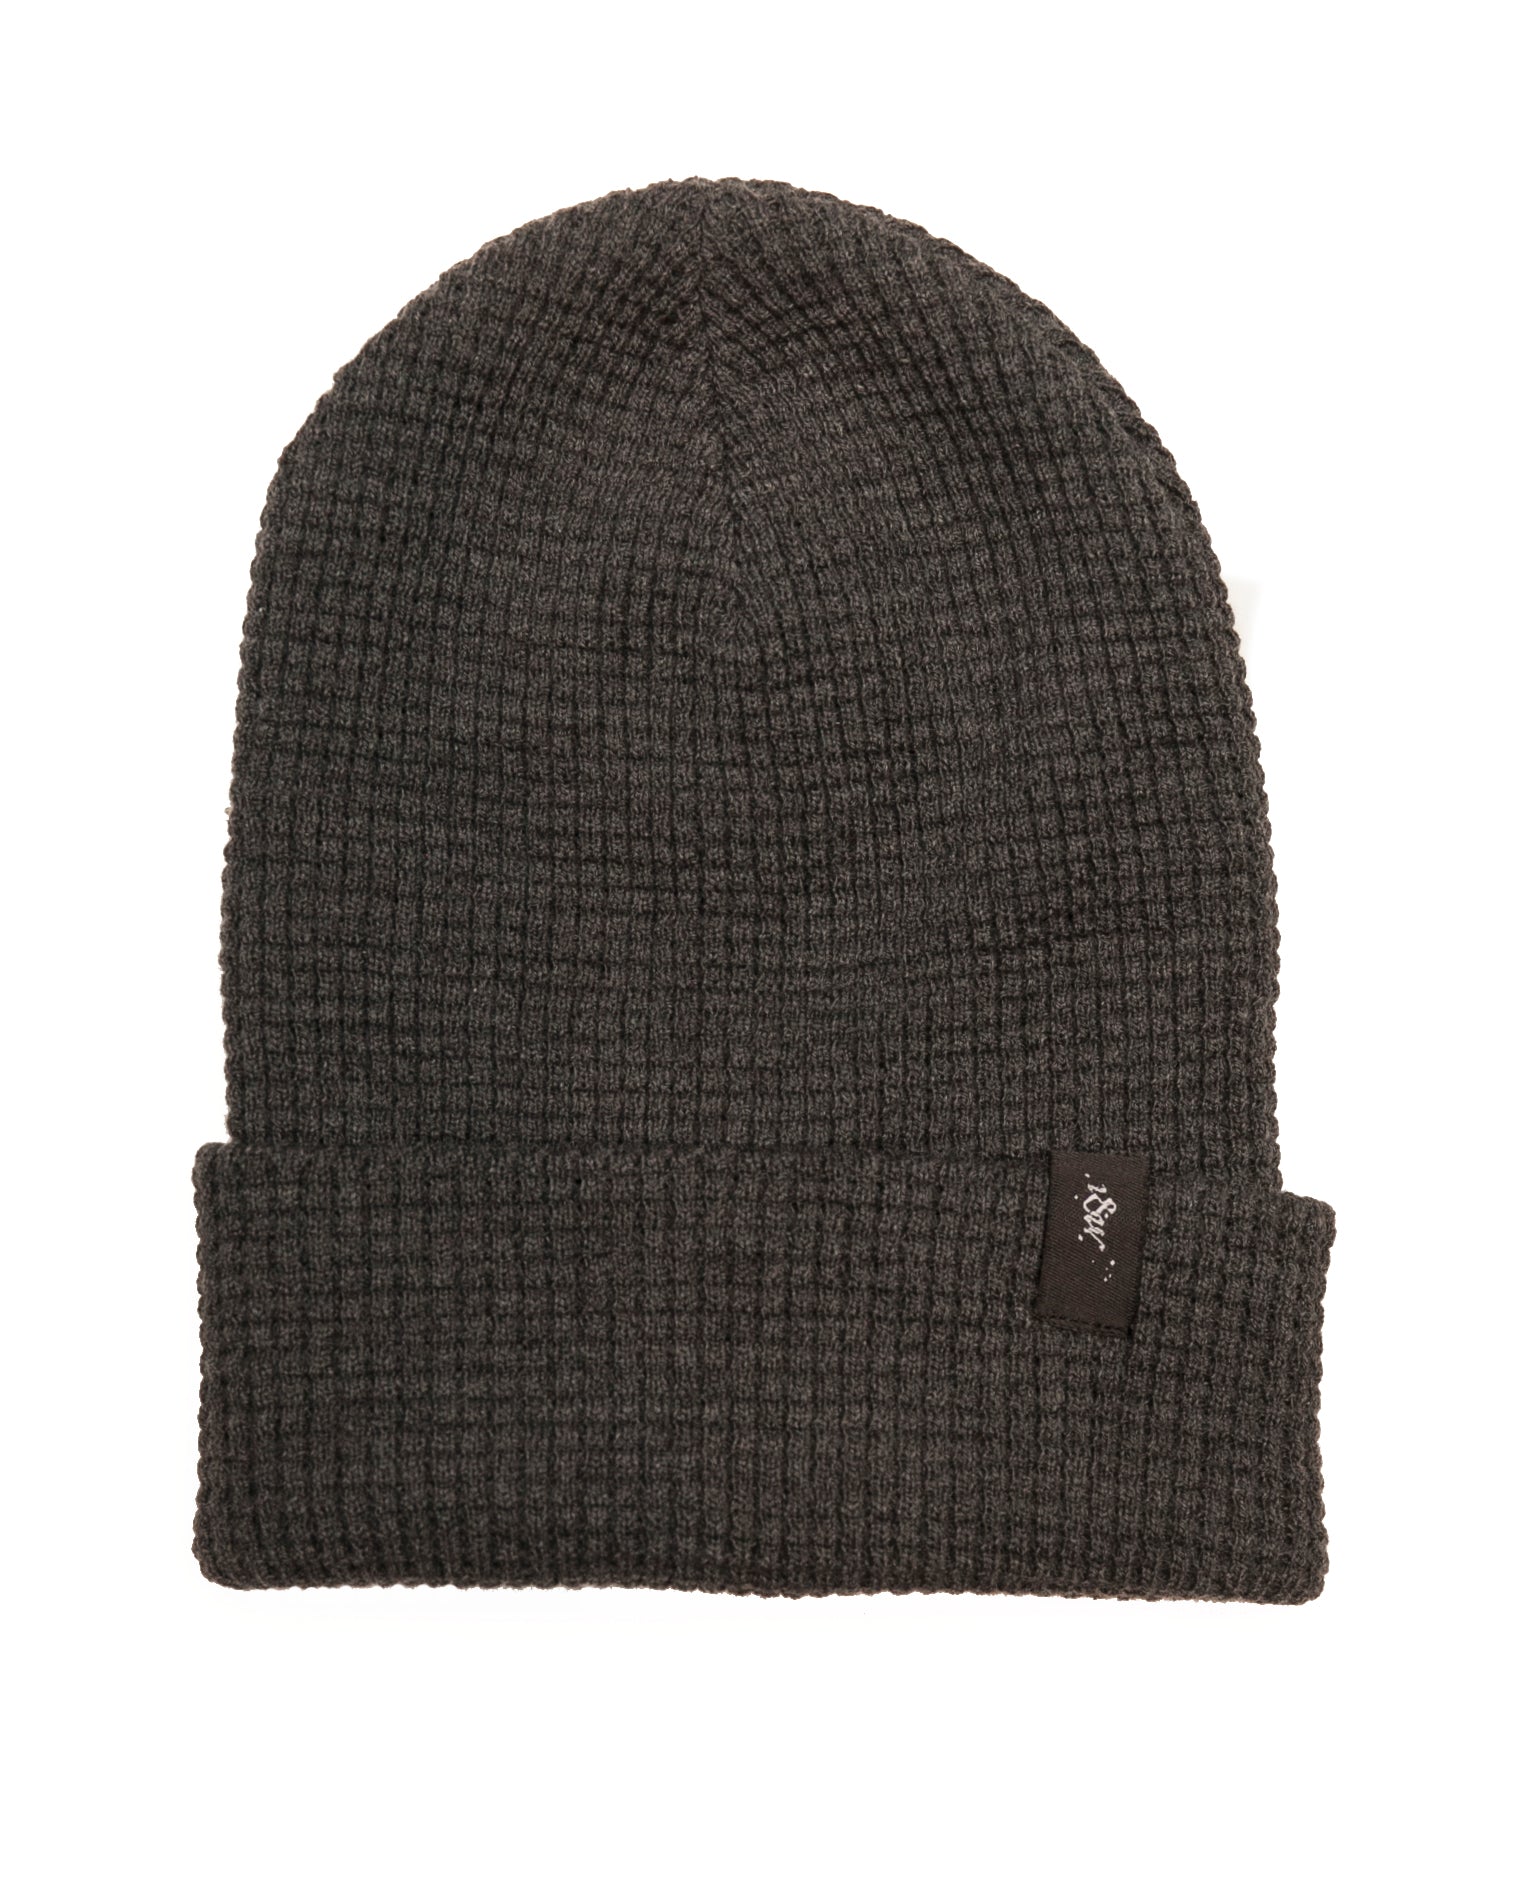 The Toque | Charcoal Waffle Knit